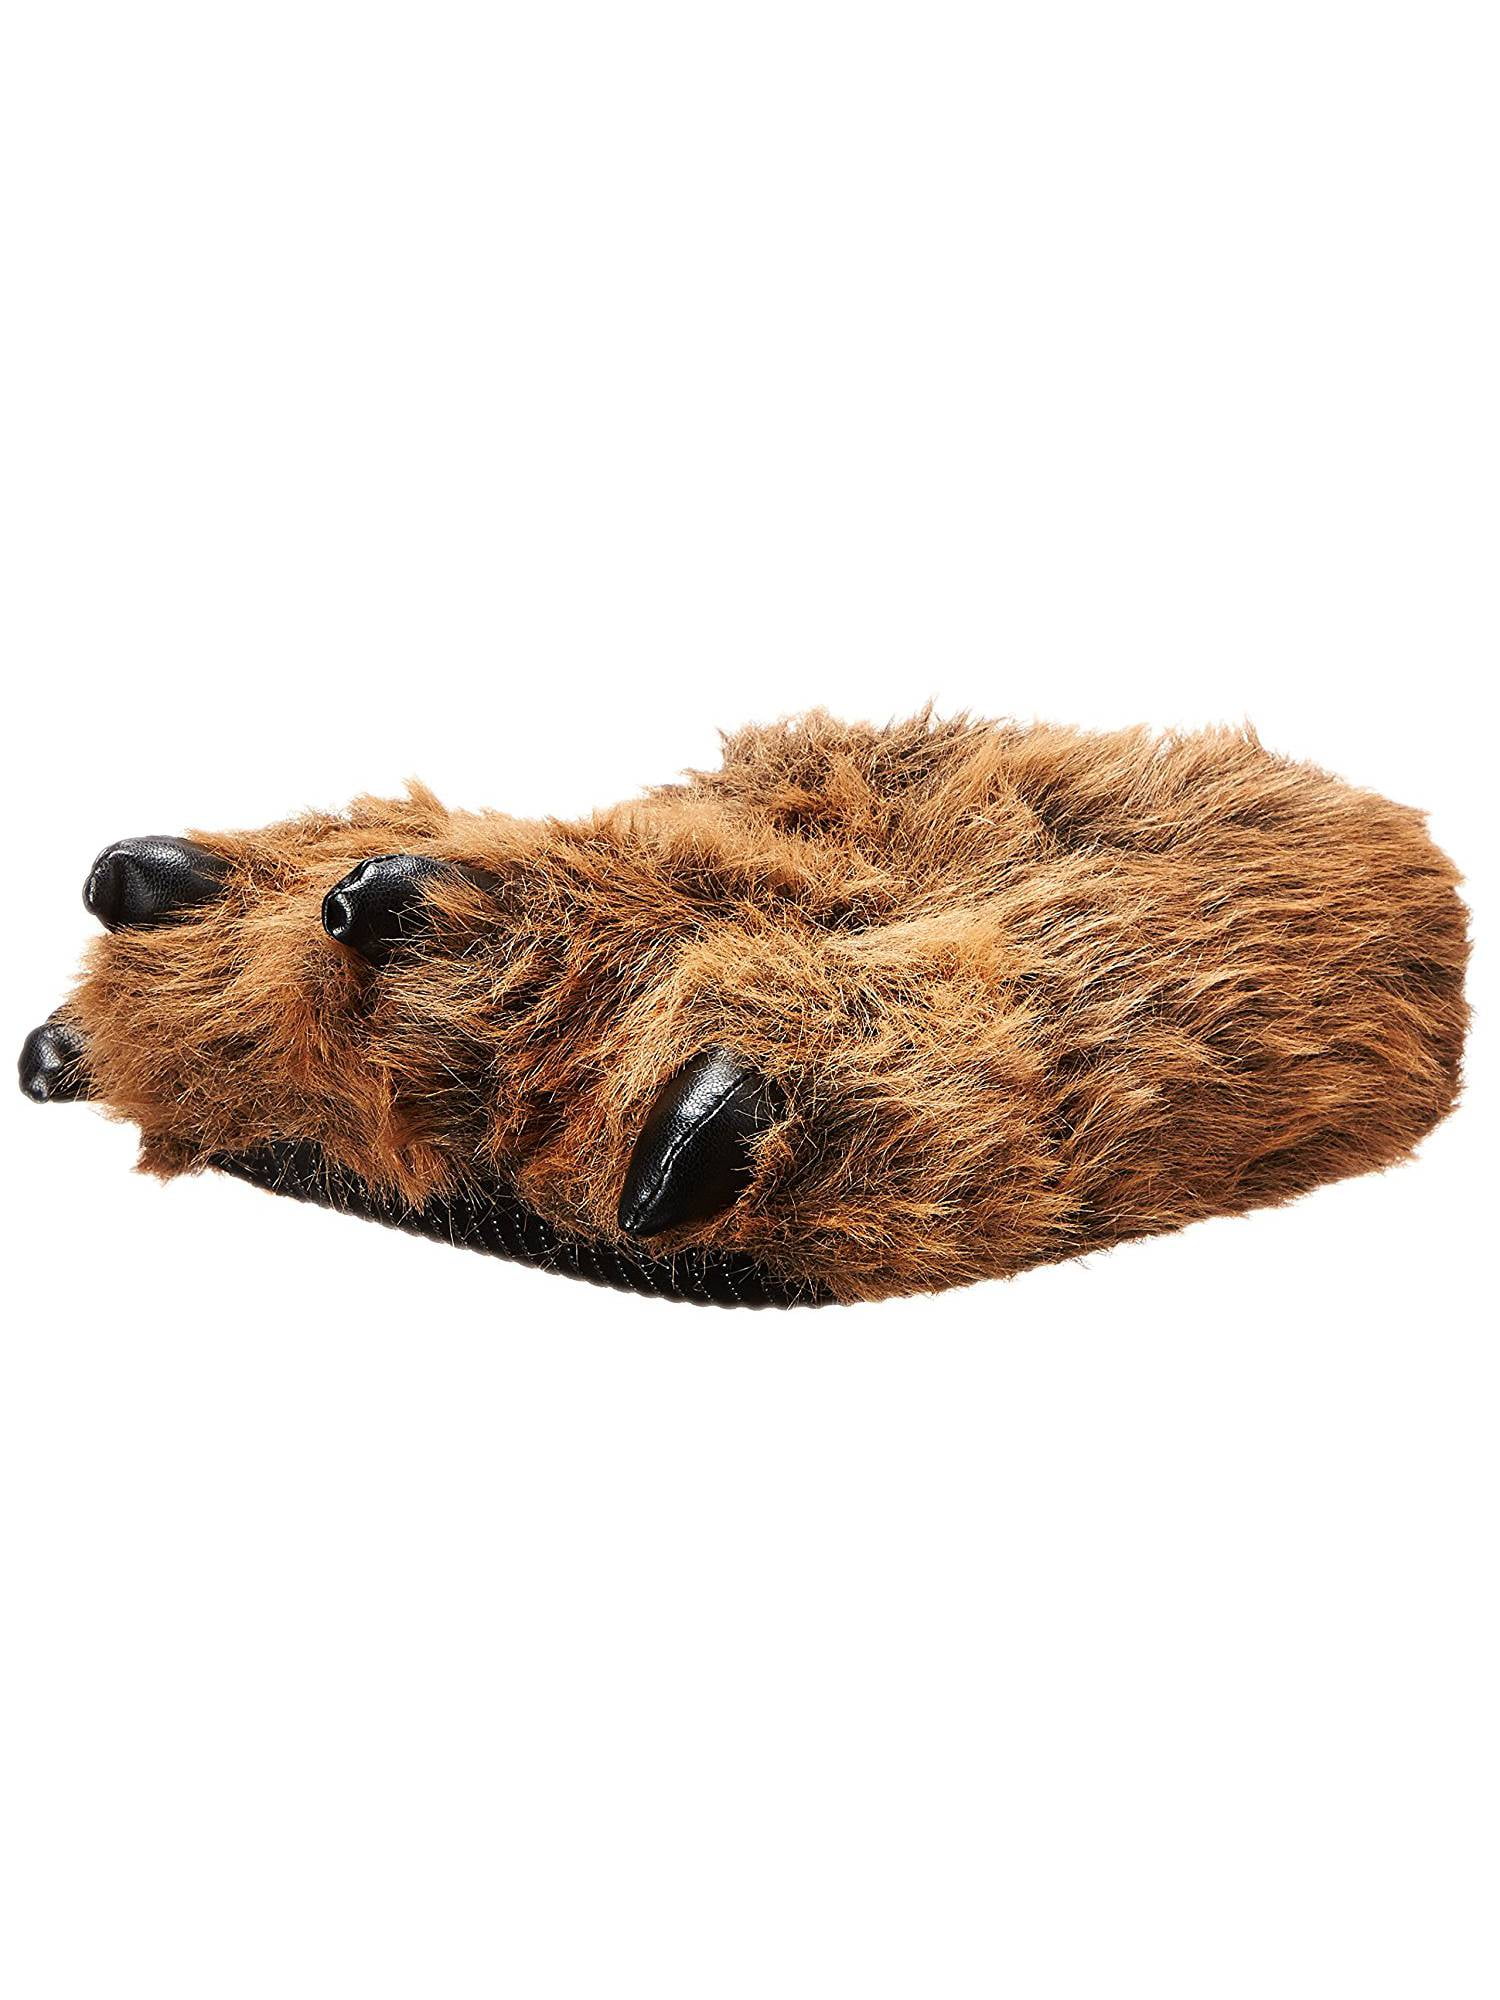 Grizzly Bear Slippers, - Walmart.com